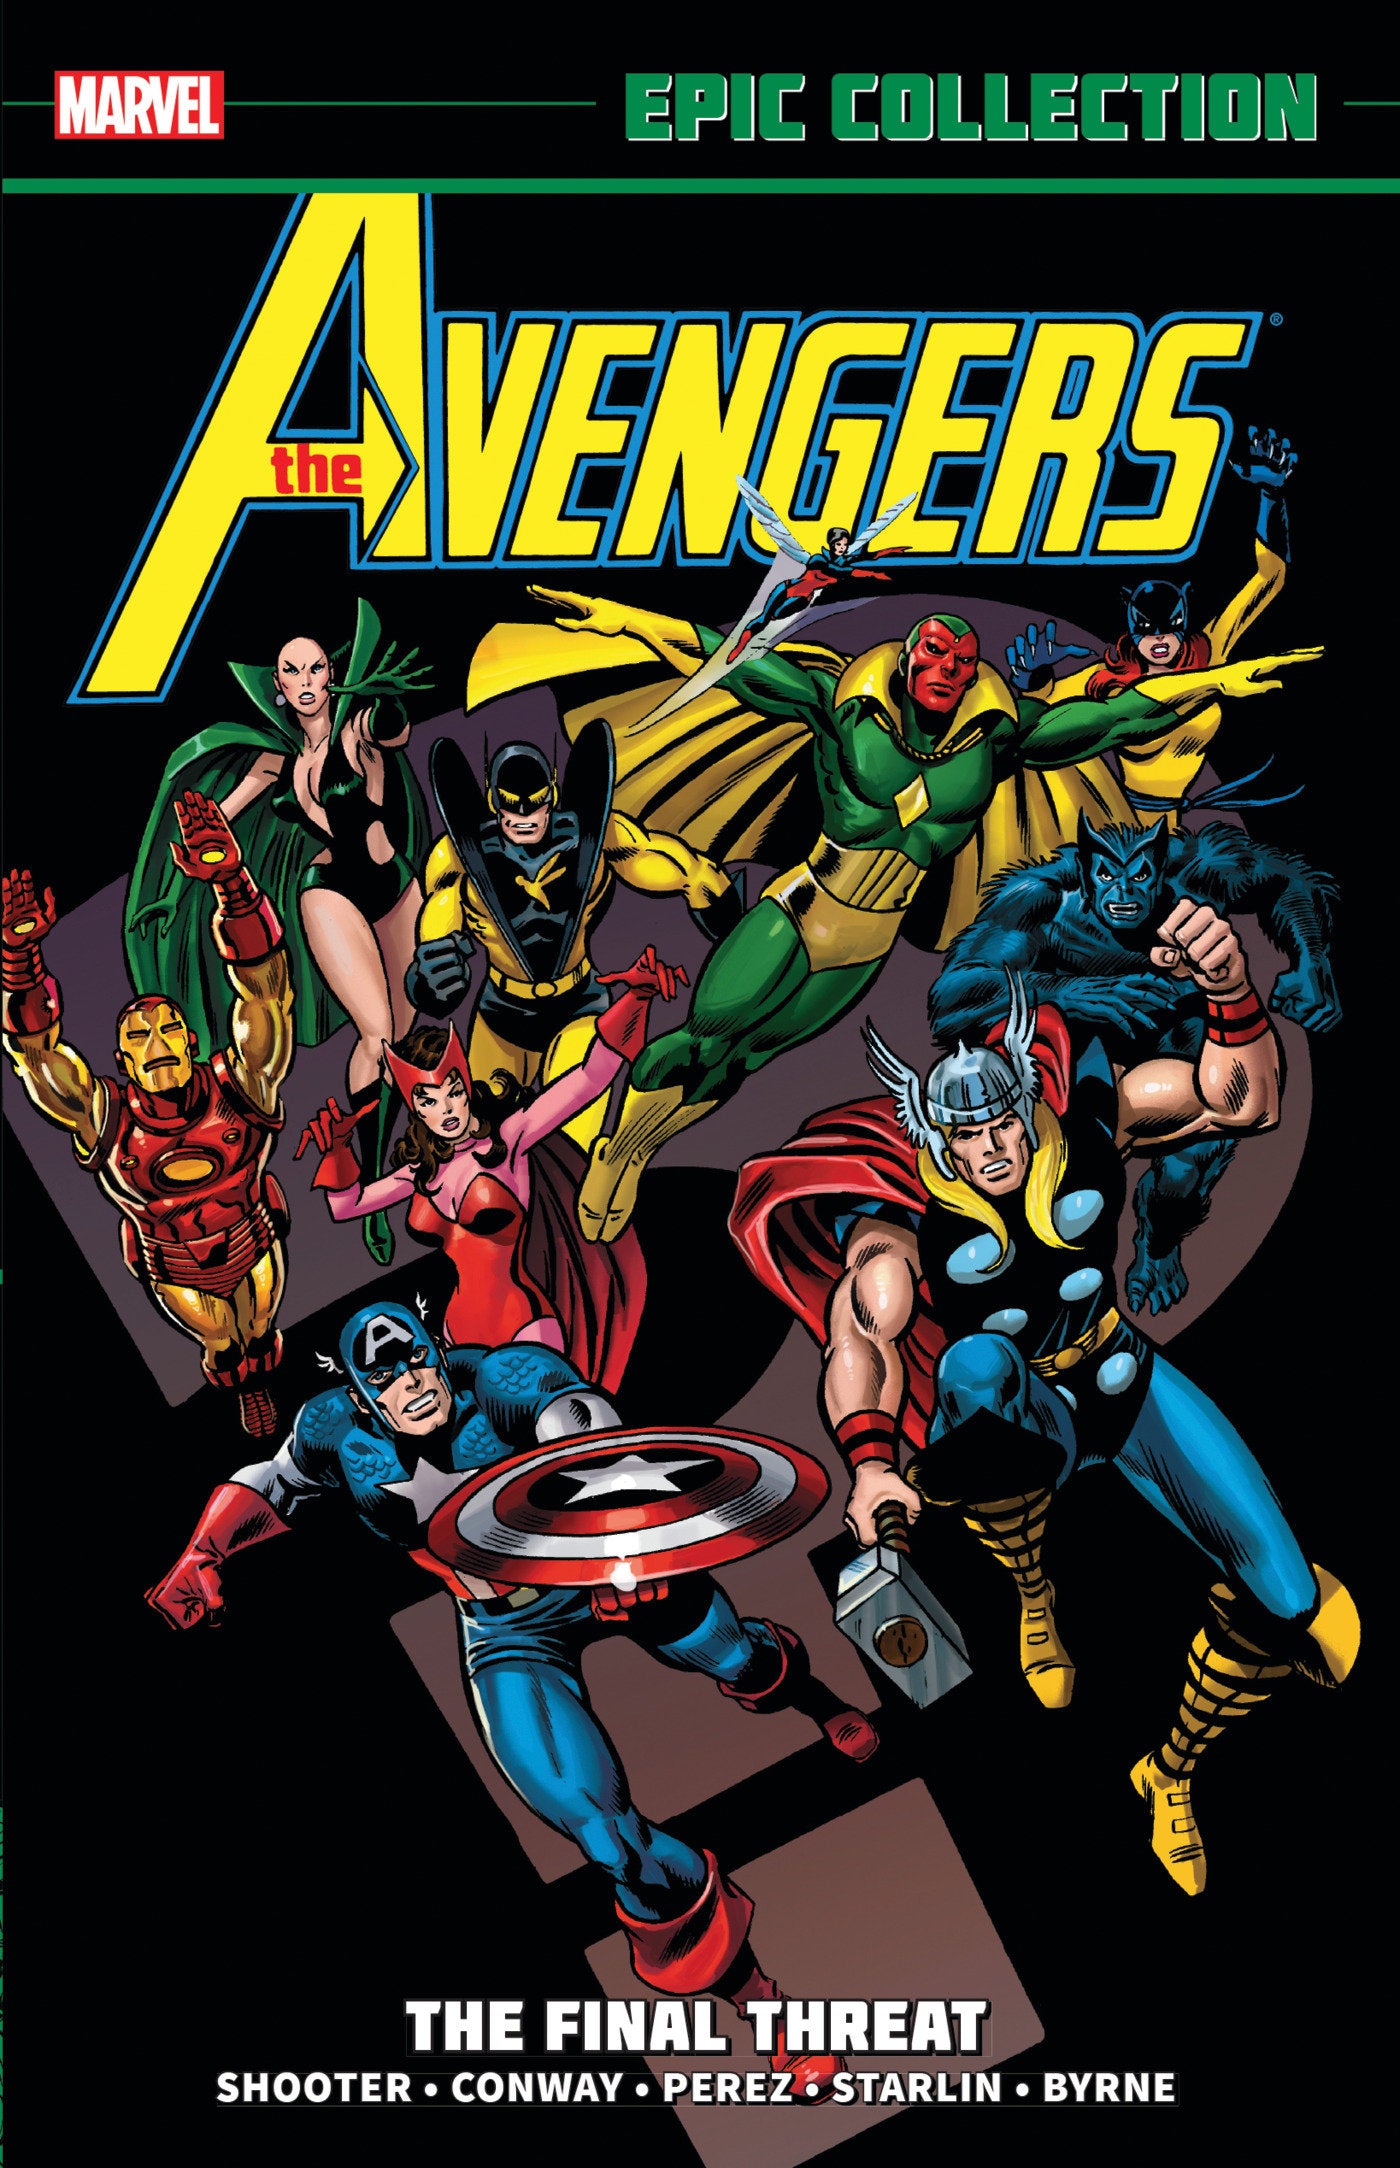 AVENGERS EPIC COLLECTION: THE FINAL THREAT TRADE PAPERBACK